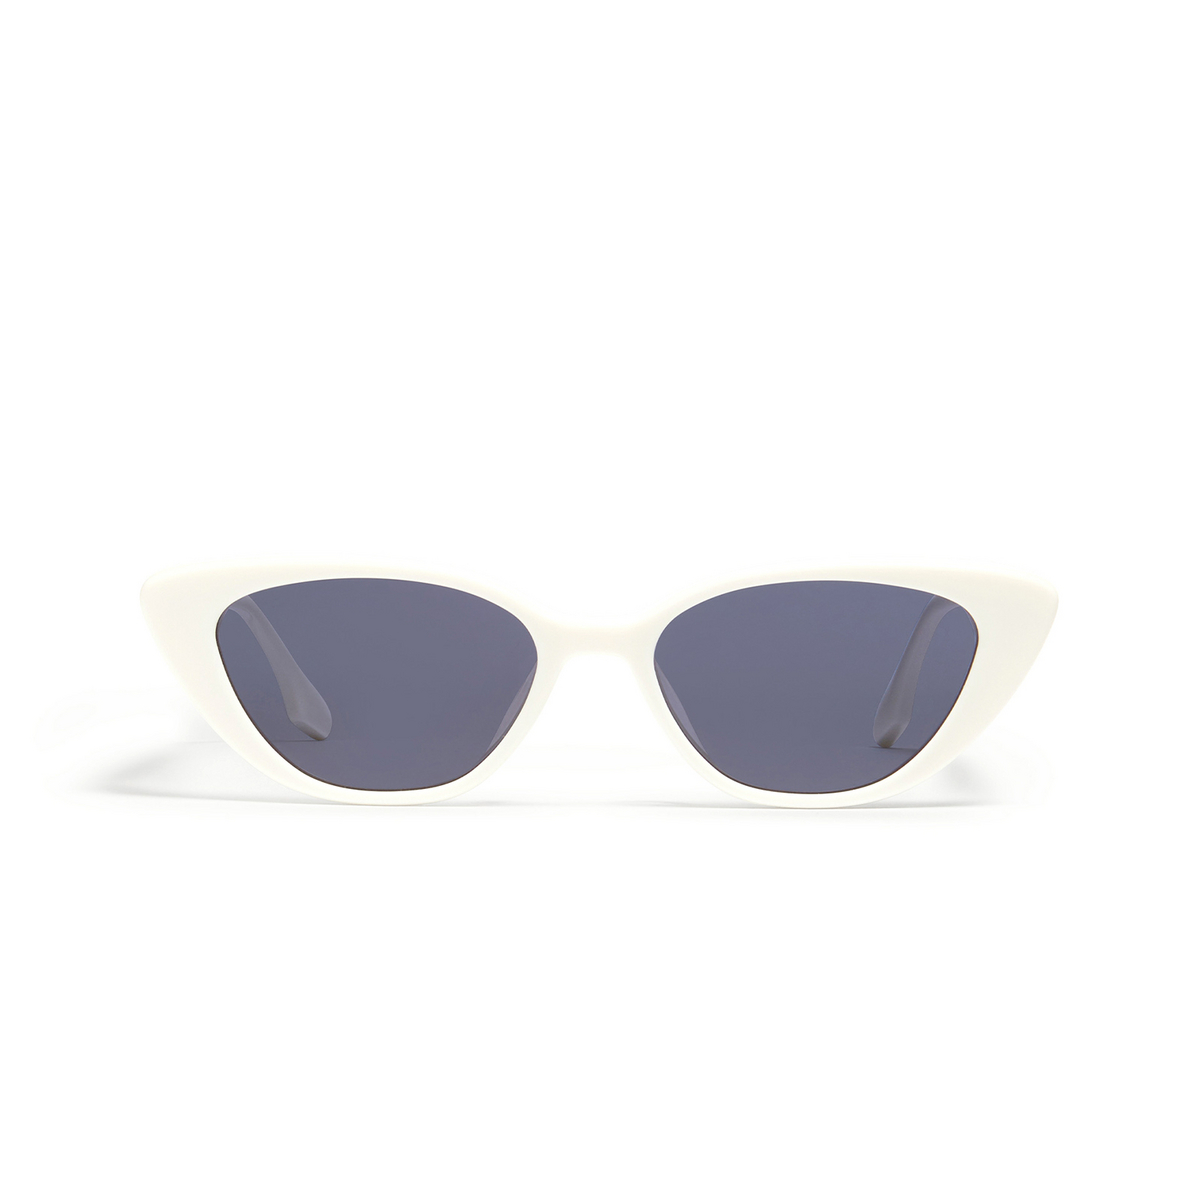 Gentle Monster® Cat-eye Sunglasses: Crella color White W1 - front view.